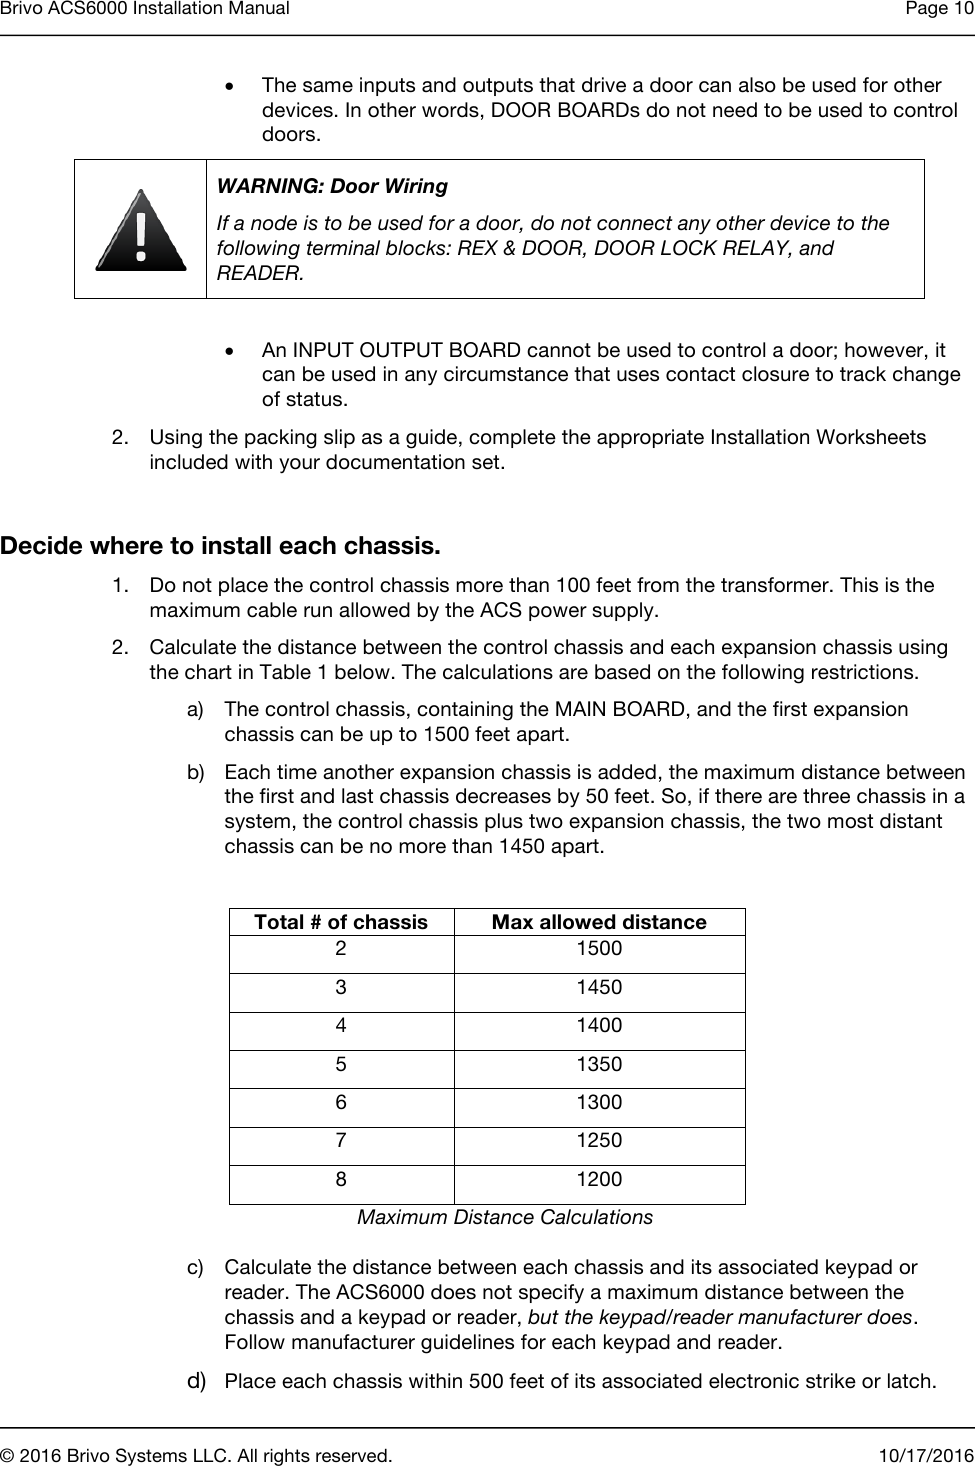 Brivo ACS6000 Installation Manual Page 10       © 2016 Brivo Systems LLC. All rights reserved. 10/17/2016  • The same inputs and outputs that drive a door can also be used for other devices. In other words, DOOR BOARDs do not need to be used to control doors.  WARNING: Door Wiring If a node is to be used for a door, do not connect any other device to the following terminal blocks: REX &amp; DOOR, DOOR LOCK RELAY, and READER.  • An INPUT OUTPUT BOARD cannot be used to control a door; however, it can be used in any circumstance that uses contact closure to track change of status. 2. Using the packing slip as a guide, complete the appropriate Installation Worksheets included with your documentation set.   Decide where to install each chassis. 1. Do not place the control chassis more than 100 feet from the transformer. This is the maximum cable run allowed by the ACS power supply. 2. Calculate the distance between the control chassis and each expansion chassis using the chart in Table 1 below. The calculations are based on the following restrictions. a) The control chassis, containing the MAIN BOARD, and the first expansion chassis can be up to 1500 feet apart. b) Each time another expansion chassis is added, the maximum distance between the first and last chassis decreases by 50 feet. So, if there are three chassis in a system, the control chassis plus two expansion chassis, the two most distant chassis can be no more than 1450 apart.  Total # of chassis Max allowed distance 2 1500 3 1450 4 1400 5 1350 6 1300 7 1250 8 1200 Maximum Distance Calculations c) Calculate the distance between each chassis and its associated keypad or reader. The ACS6000 does not specify a maximum distance between the chassis and a keypad or reader, but the keypad/reader manufacturer does. Follow manufacturer guidelines for each keypad and reader. d) Place each chassis within 500 feet of its associated electronic strike or latch. 